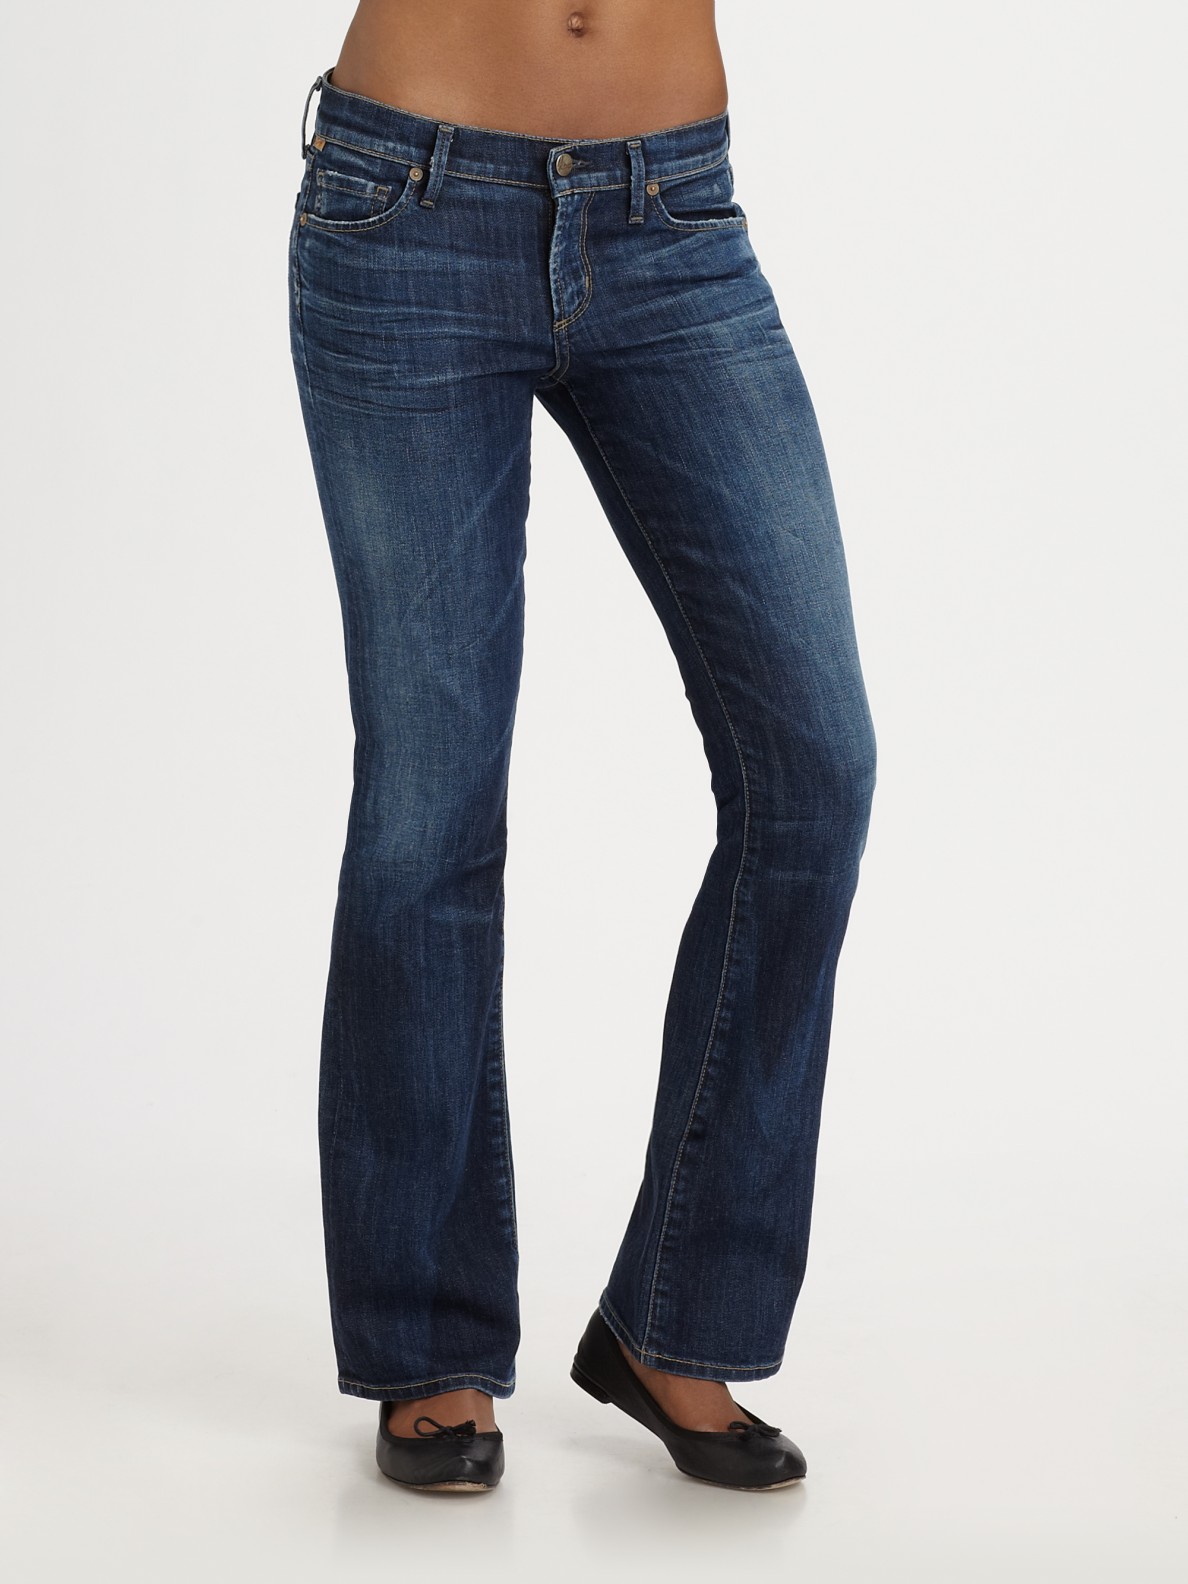 Citizens of humanity Dita Petite Bootcut Jeans in Black | Lyst